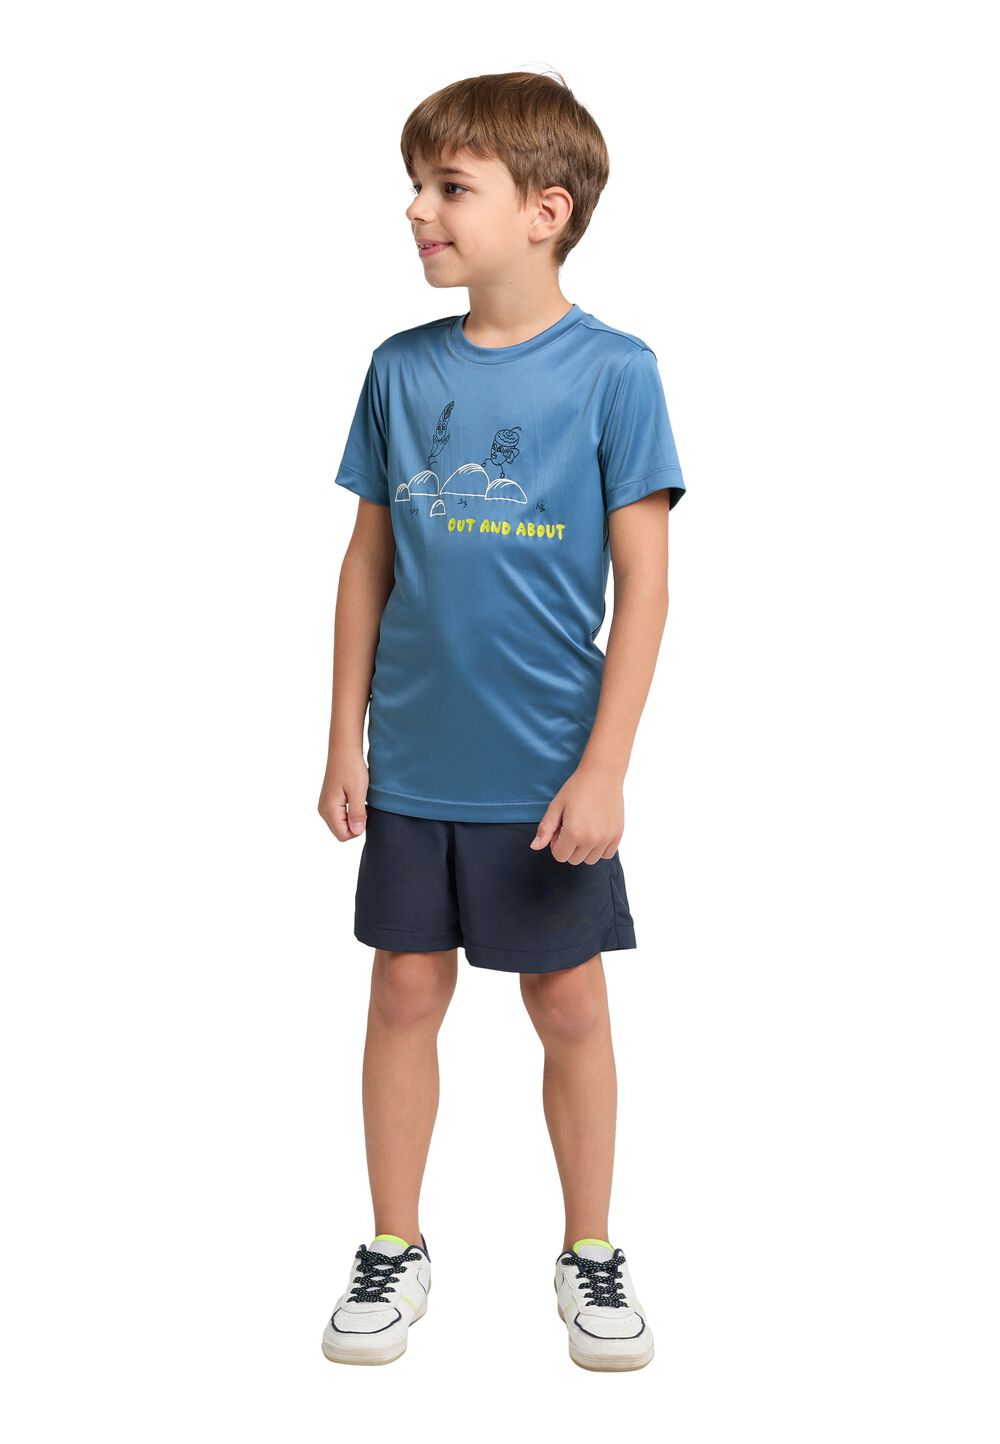 Jack Wolfskin OUT AND About T-Shirt Kids Functioneel shirt Kinderen 140 ele tal blue ele tal blue